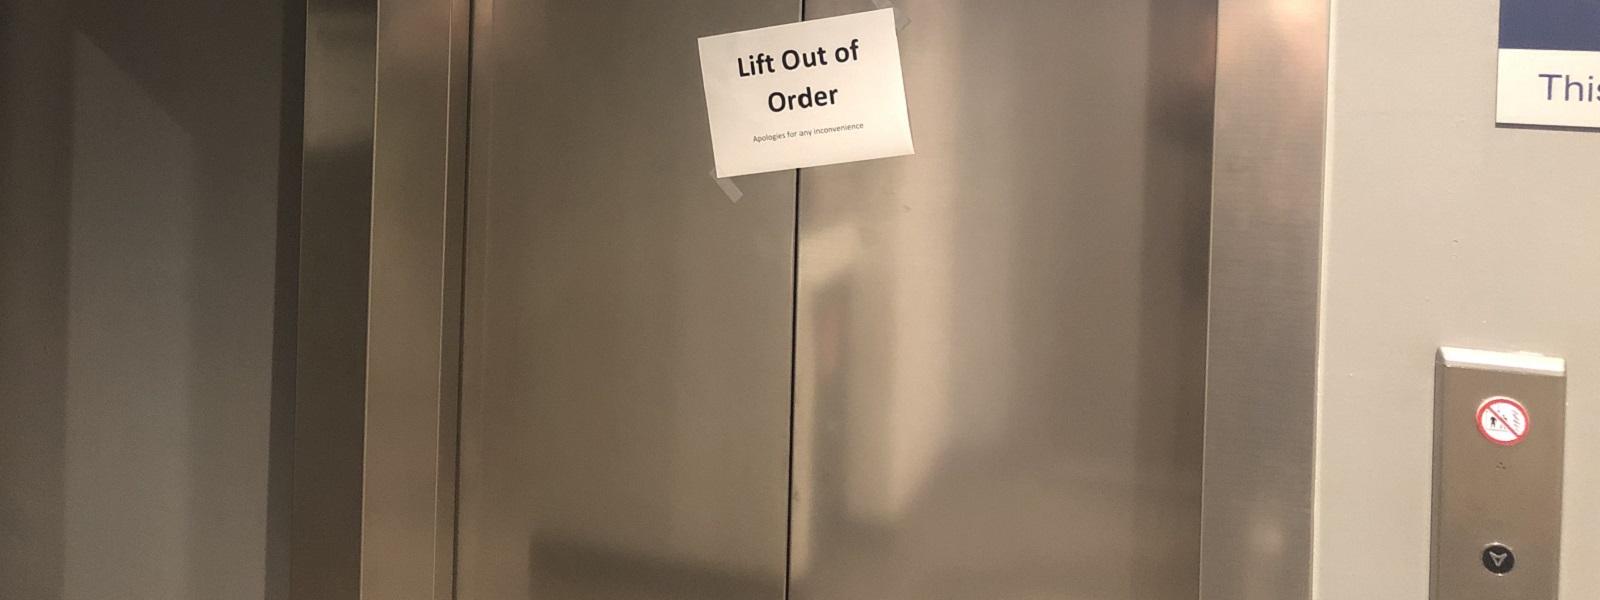 Lift with an Out of Order sign on it